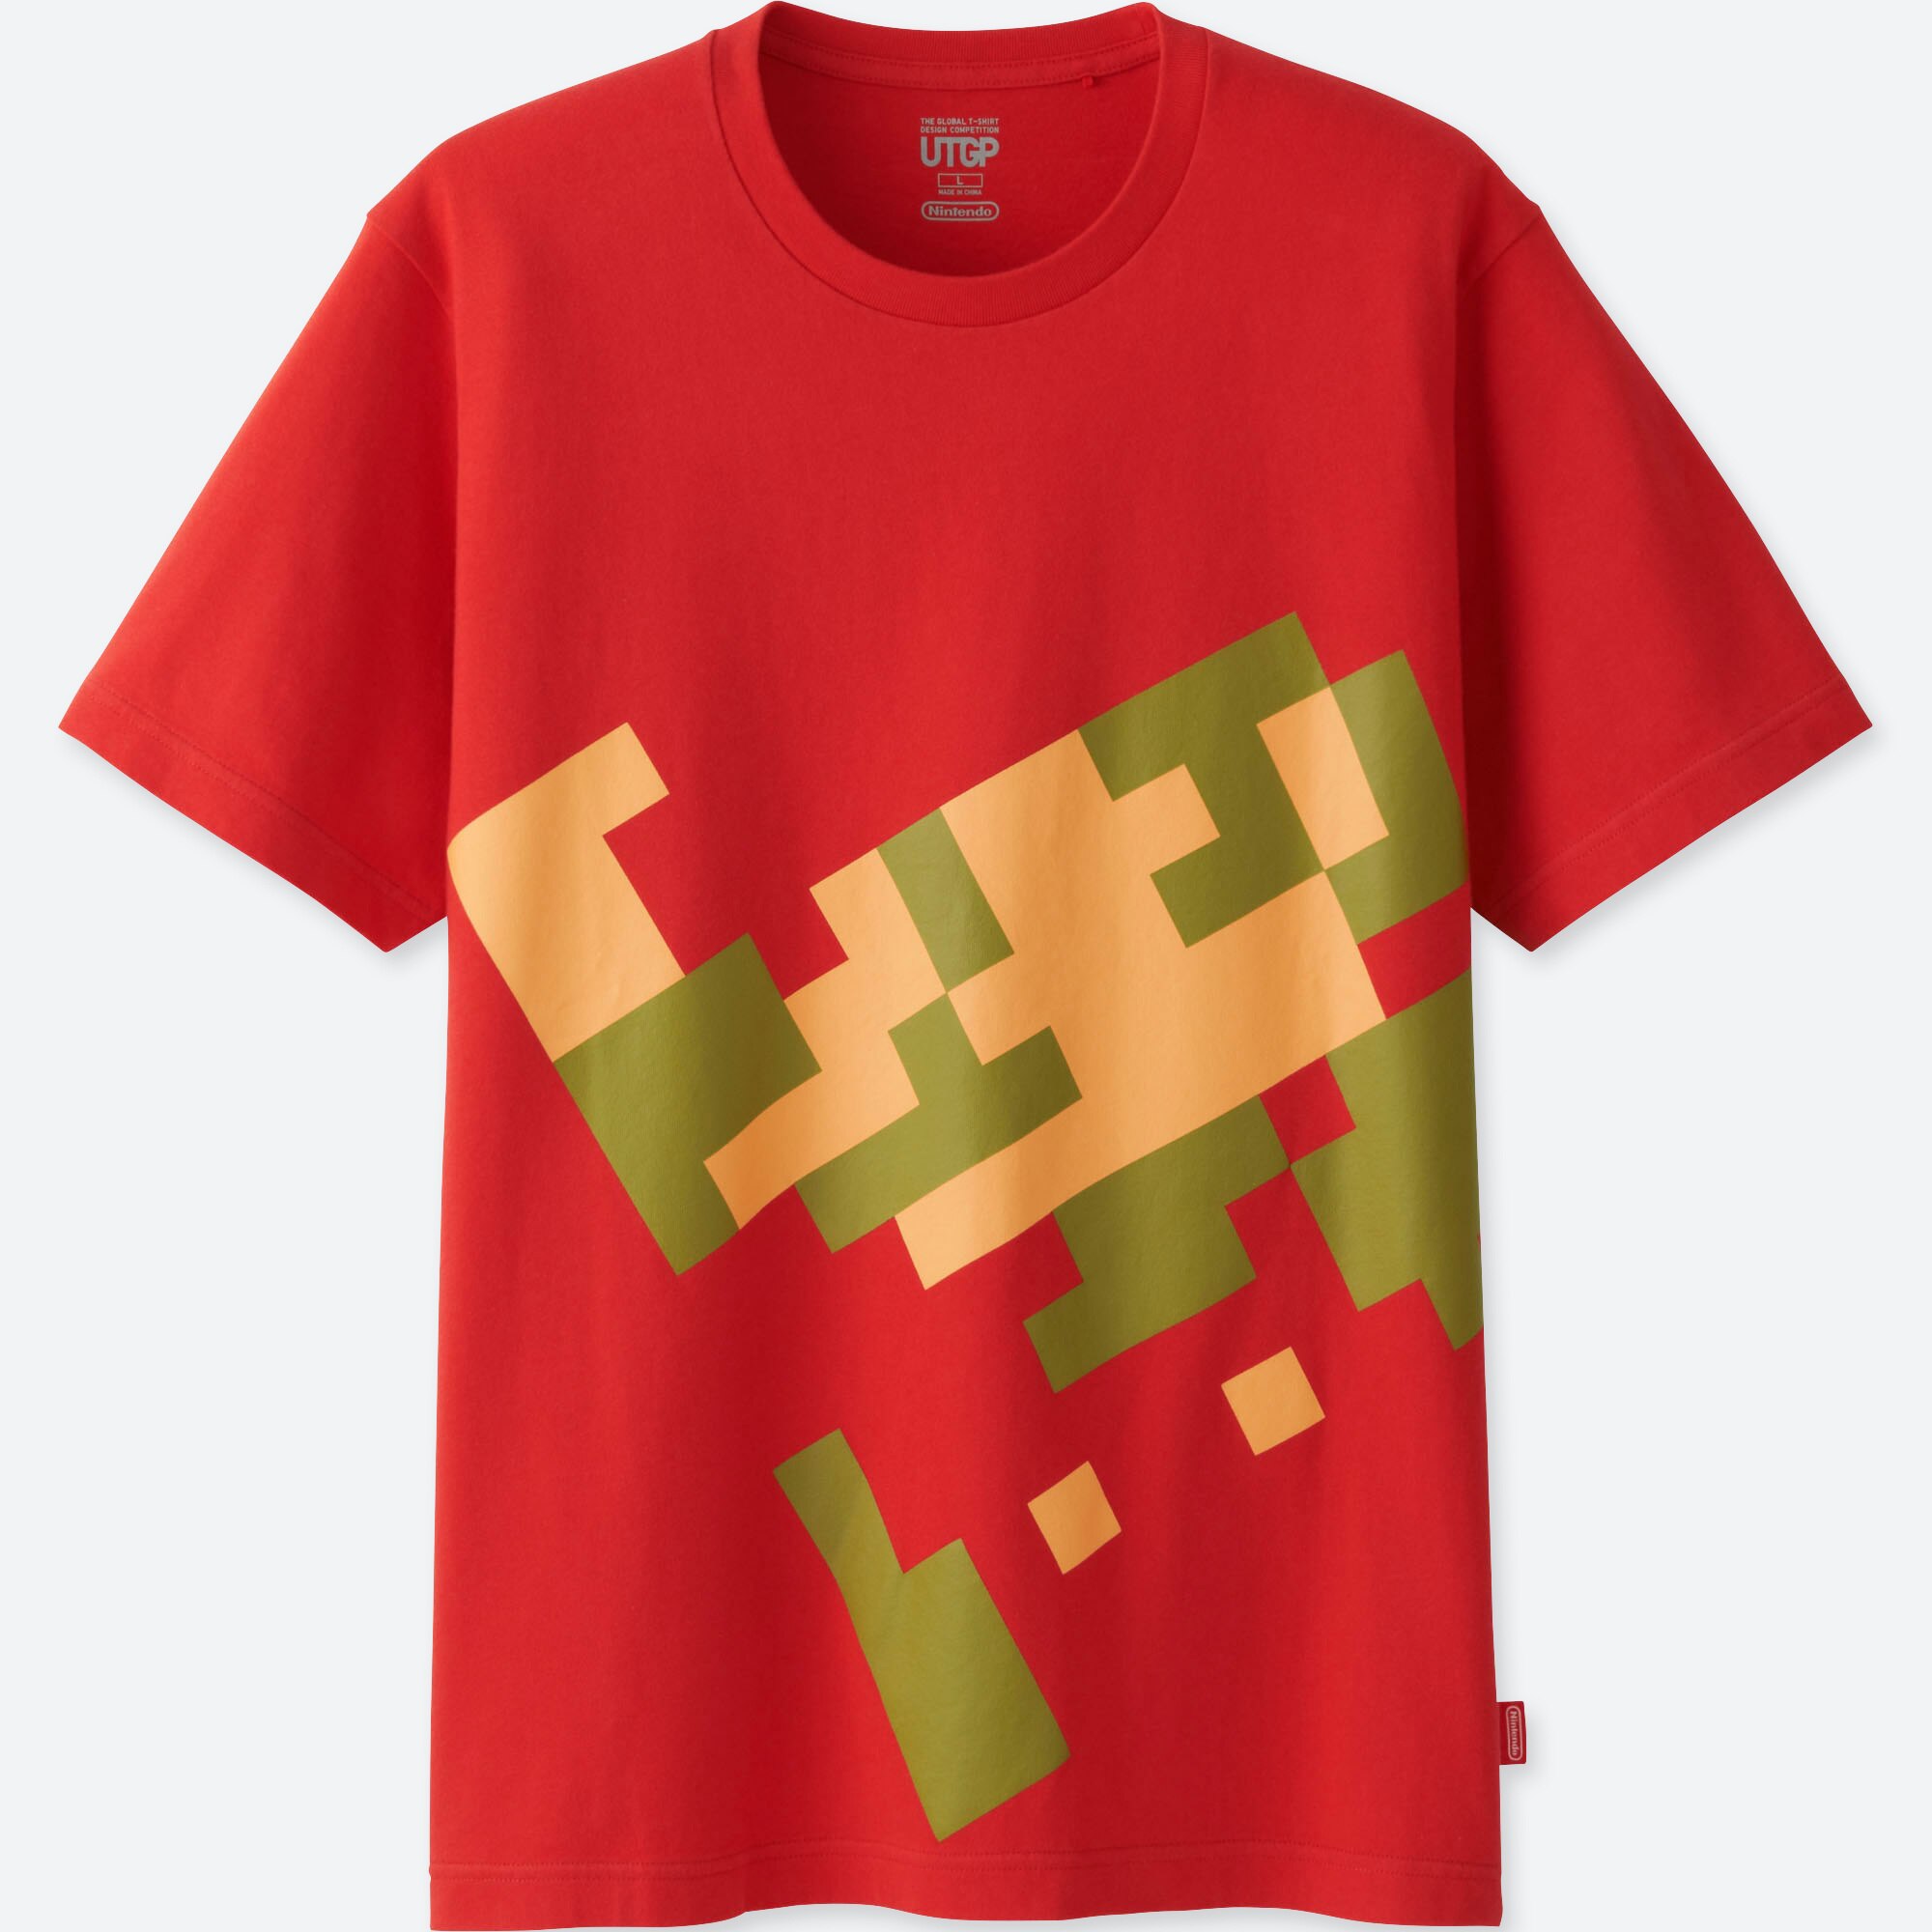 red graphic t